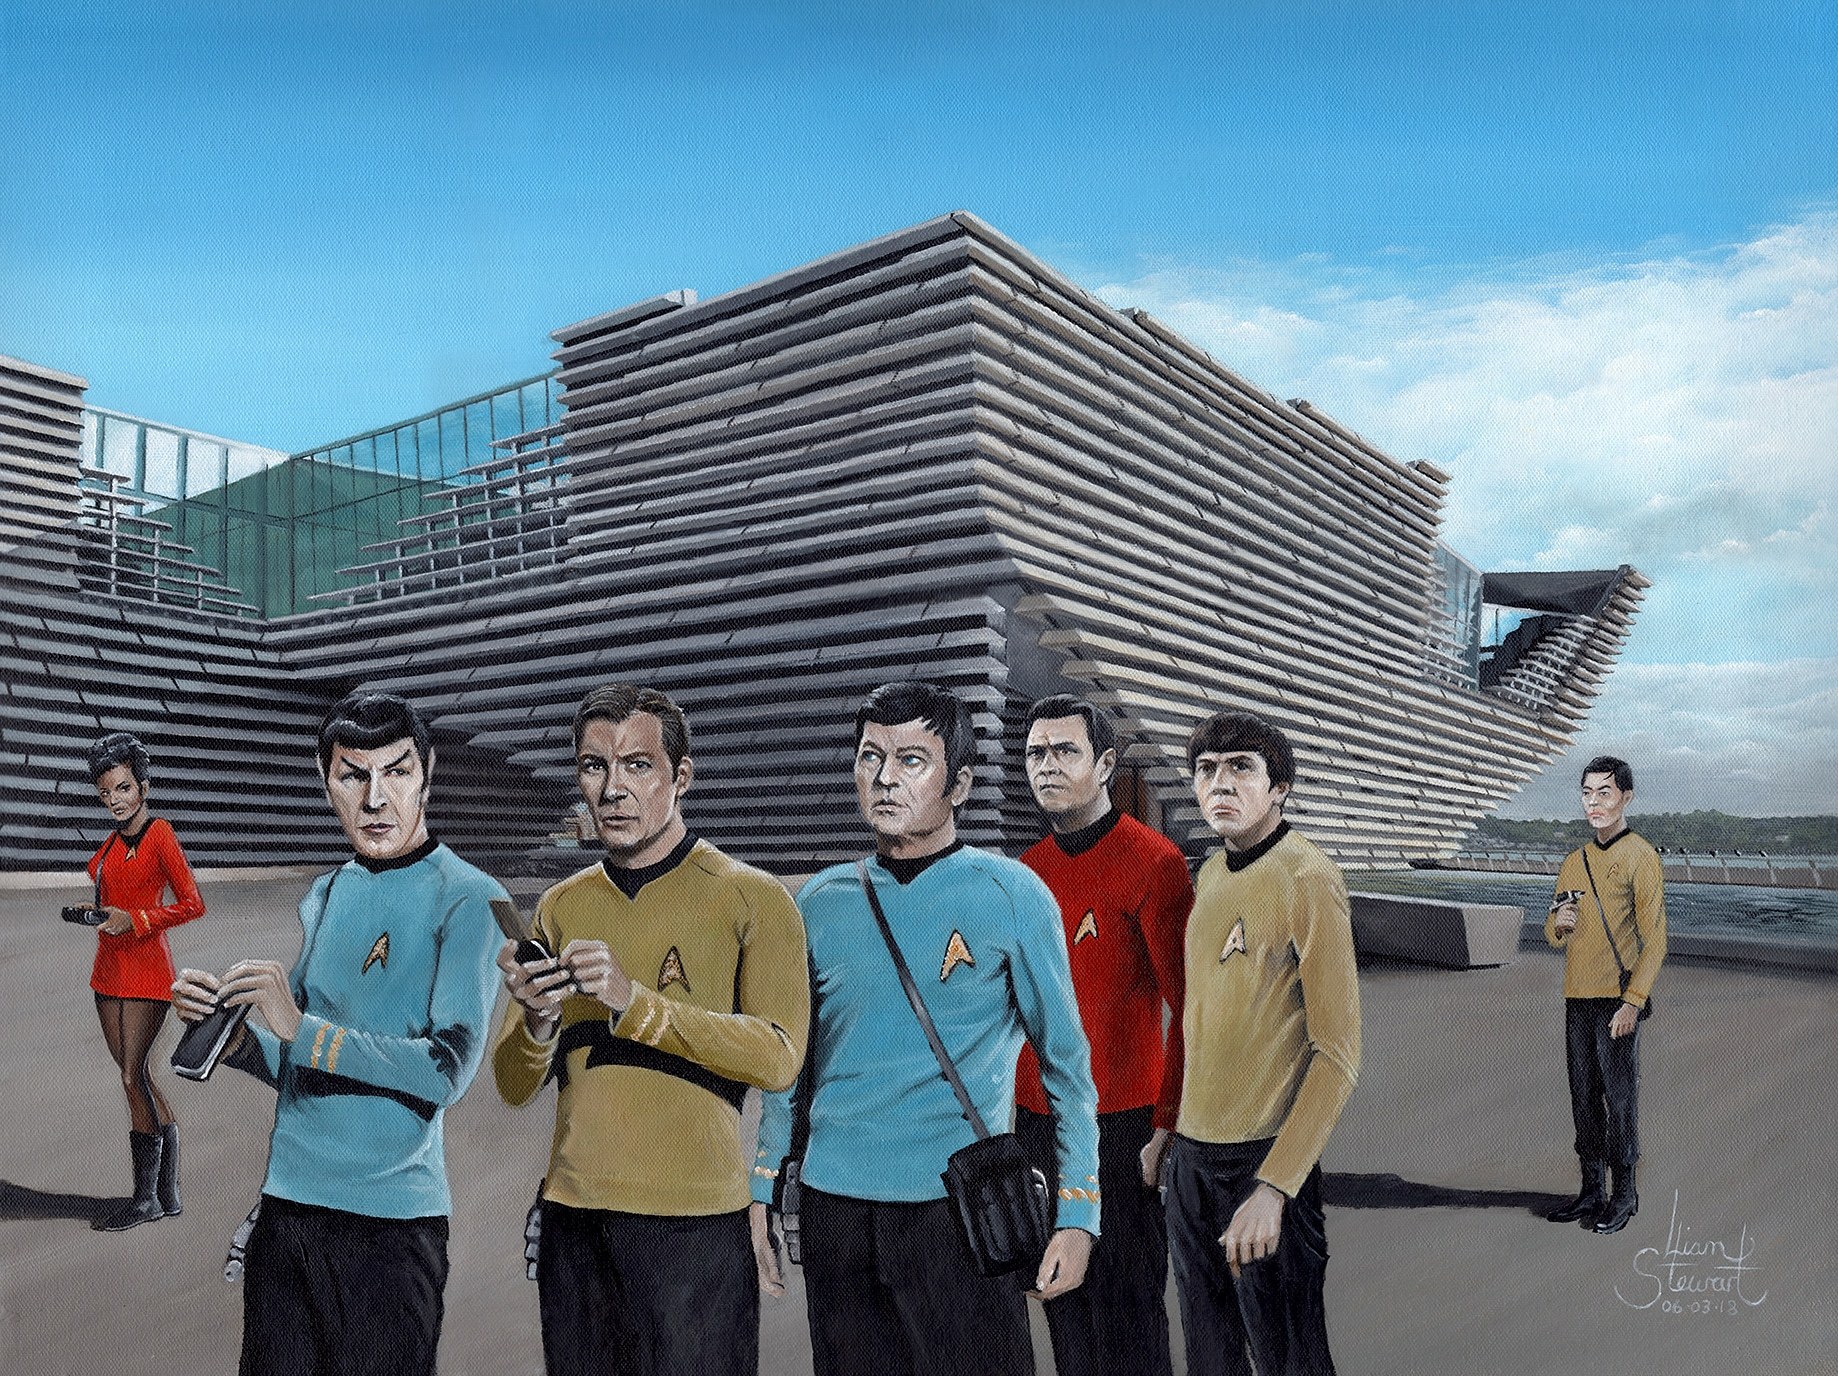 Star Trek at the V&A is the latest work from artist Liam Stewart.